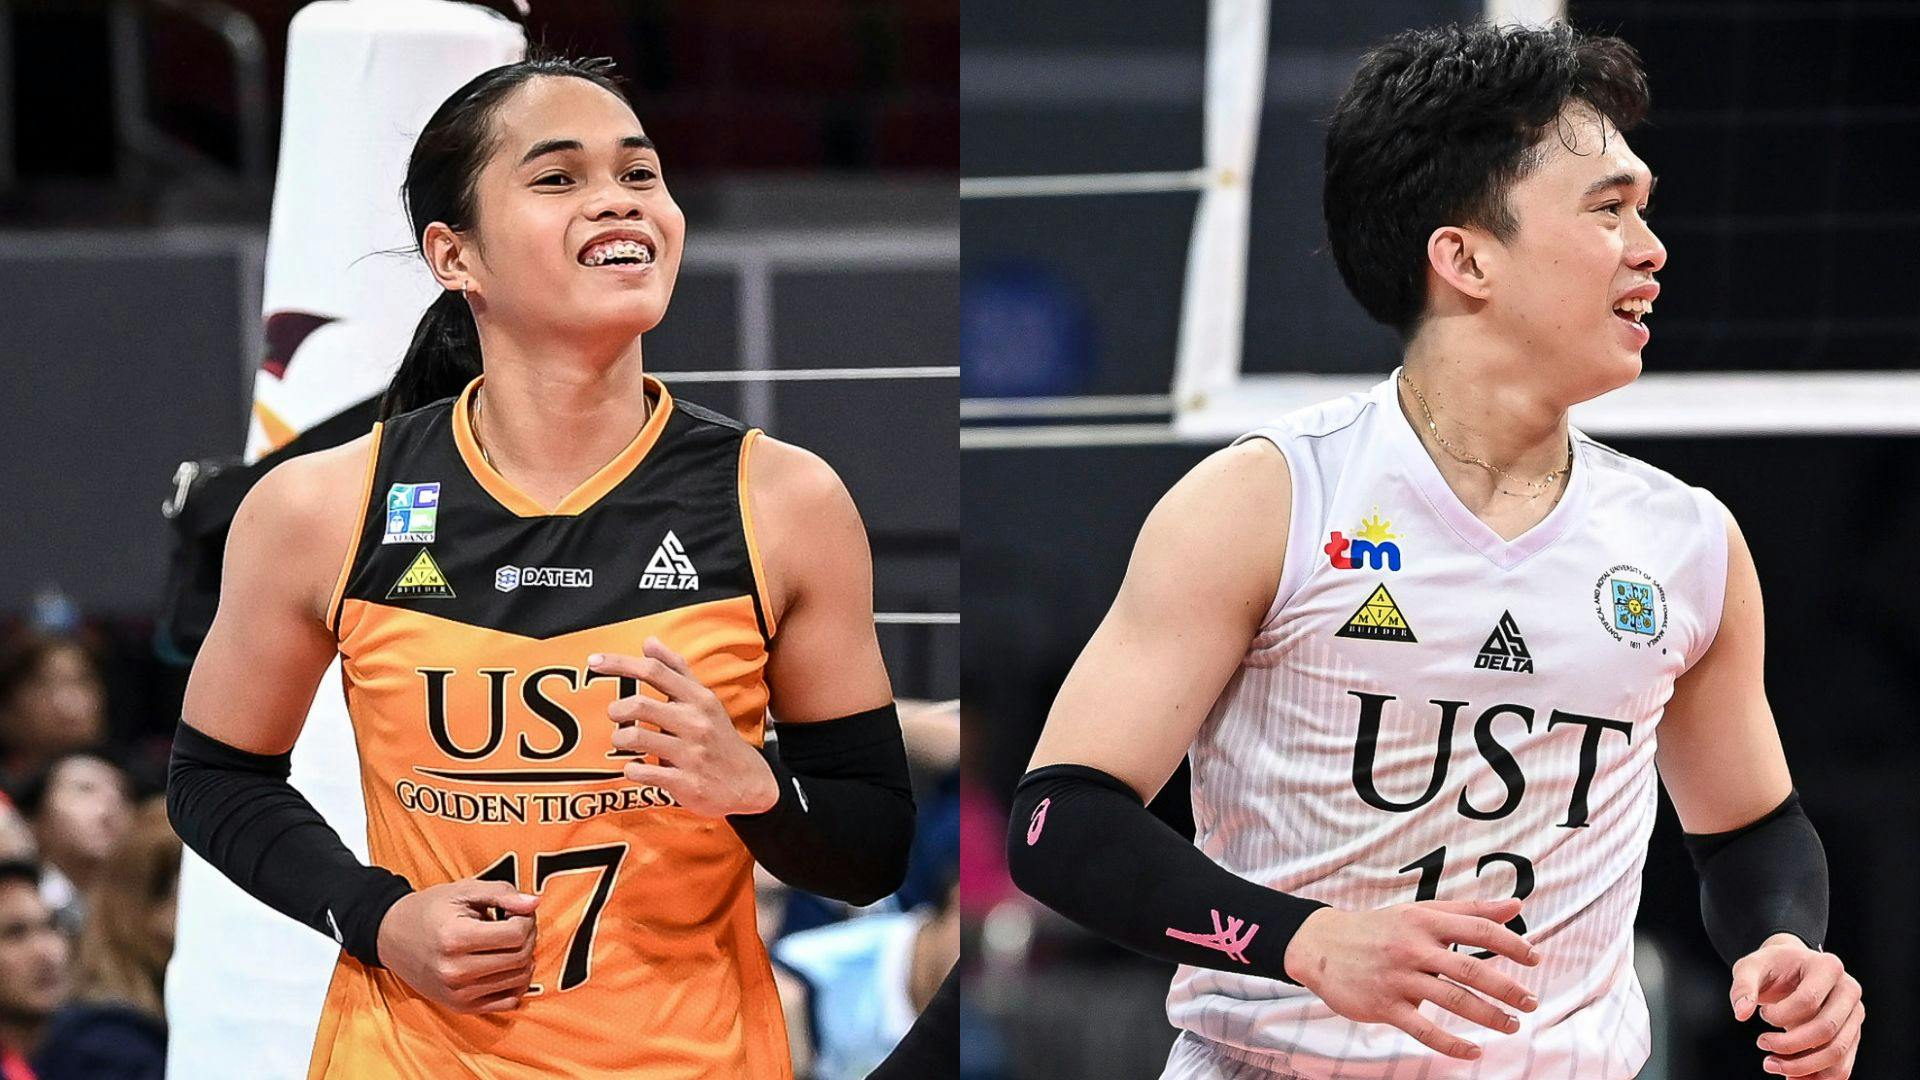 UAAP: UST’s Poyos, Ybanez grab third UAAP Player of the Week citations after stellar performances